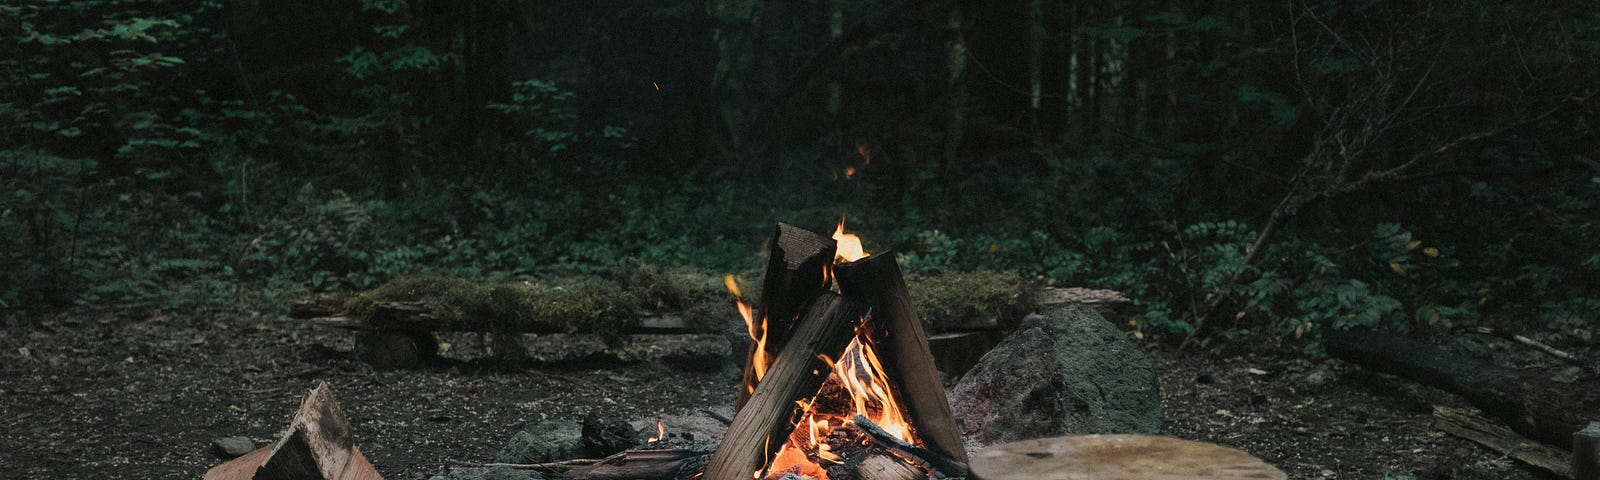 Campsite with a fire.